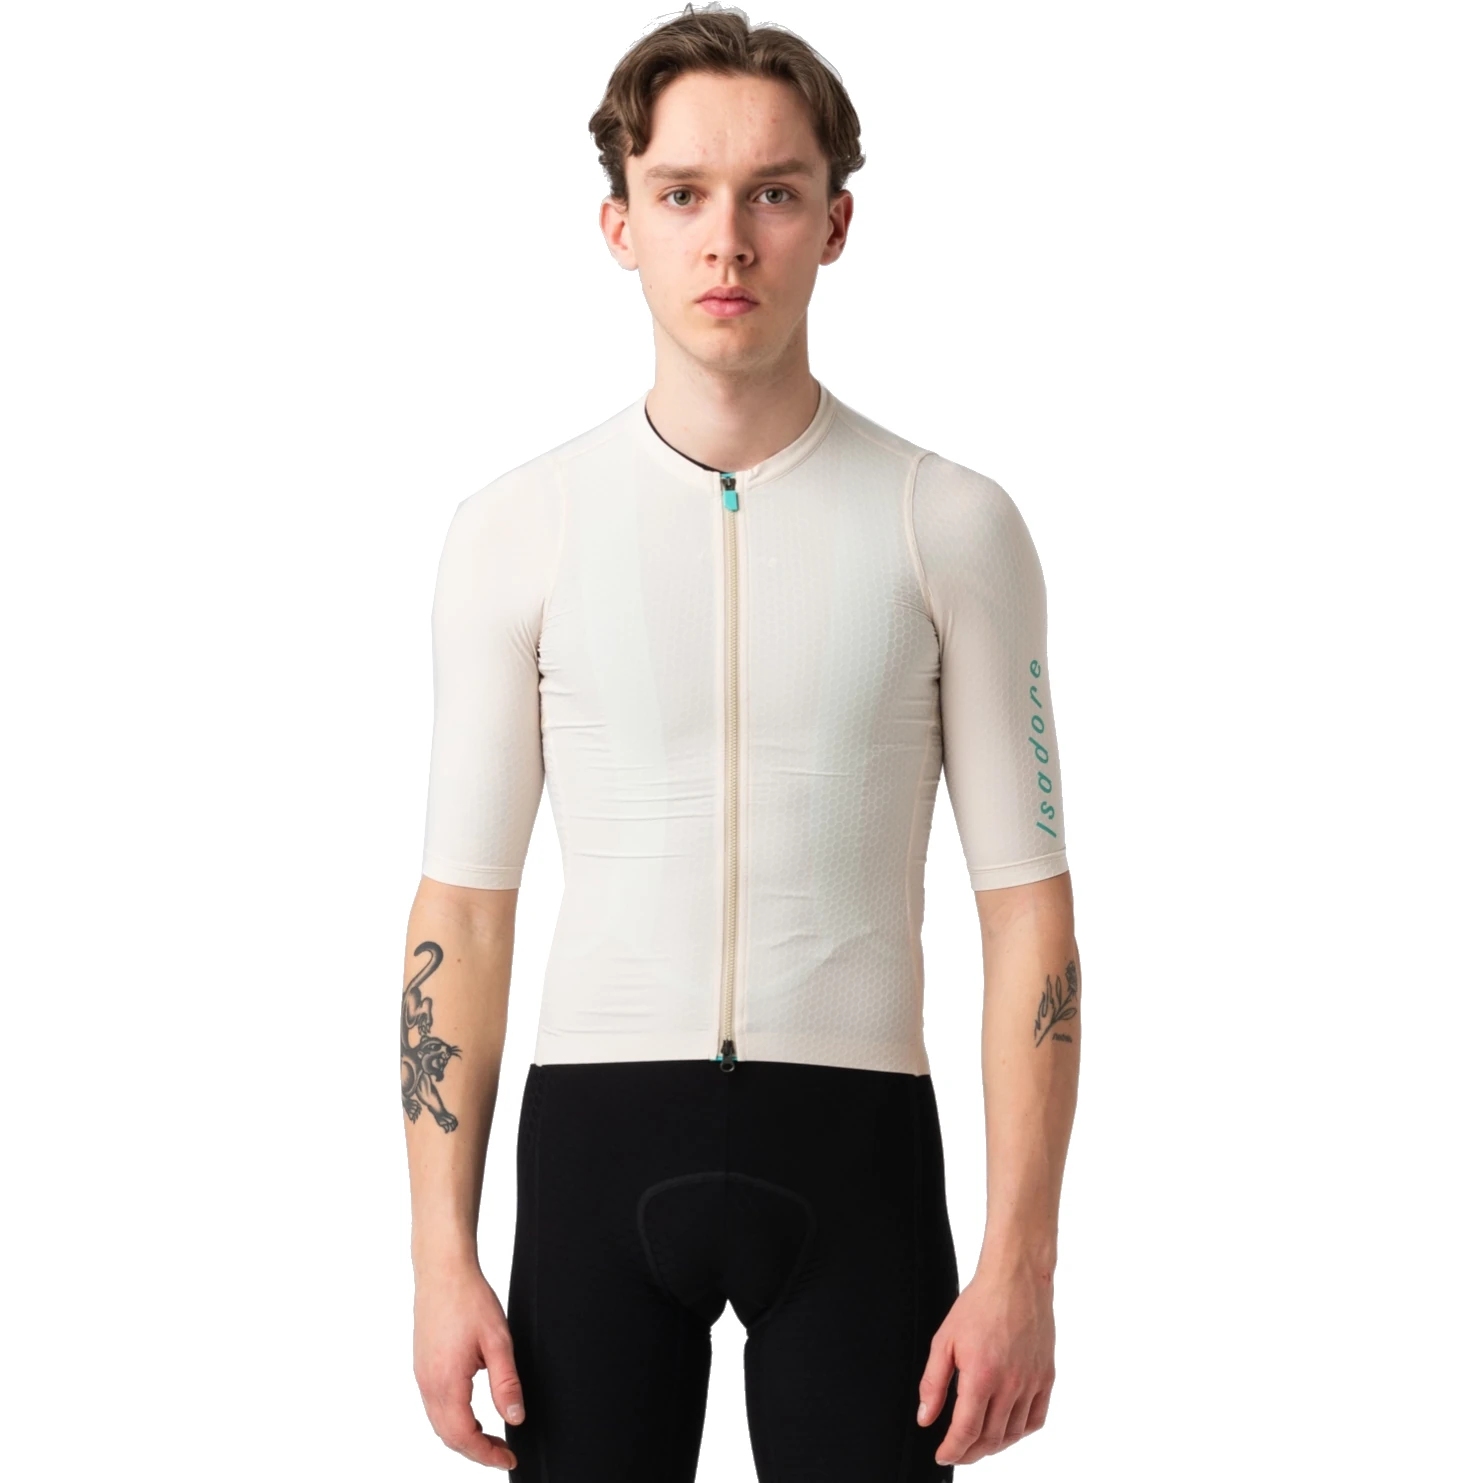 Picture of Isadore Echelon Aero Cycling Jersey Men - Butter